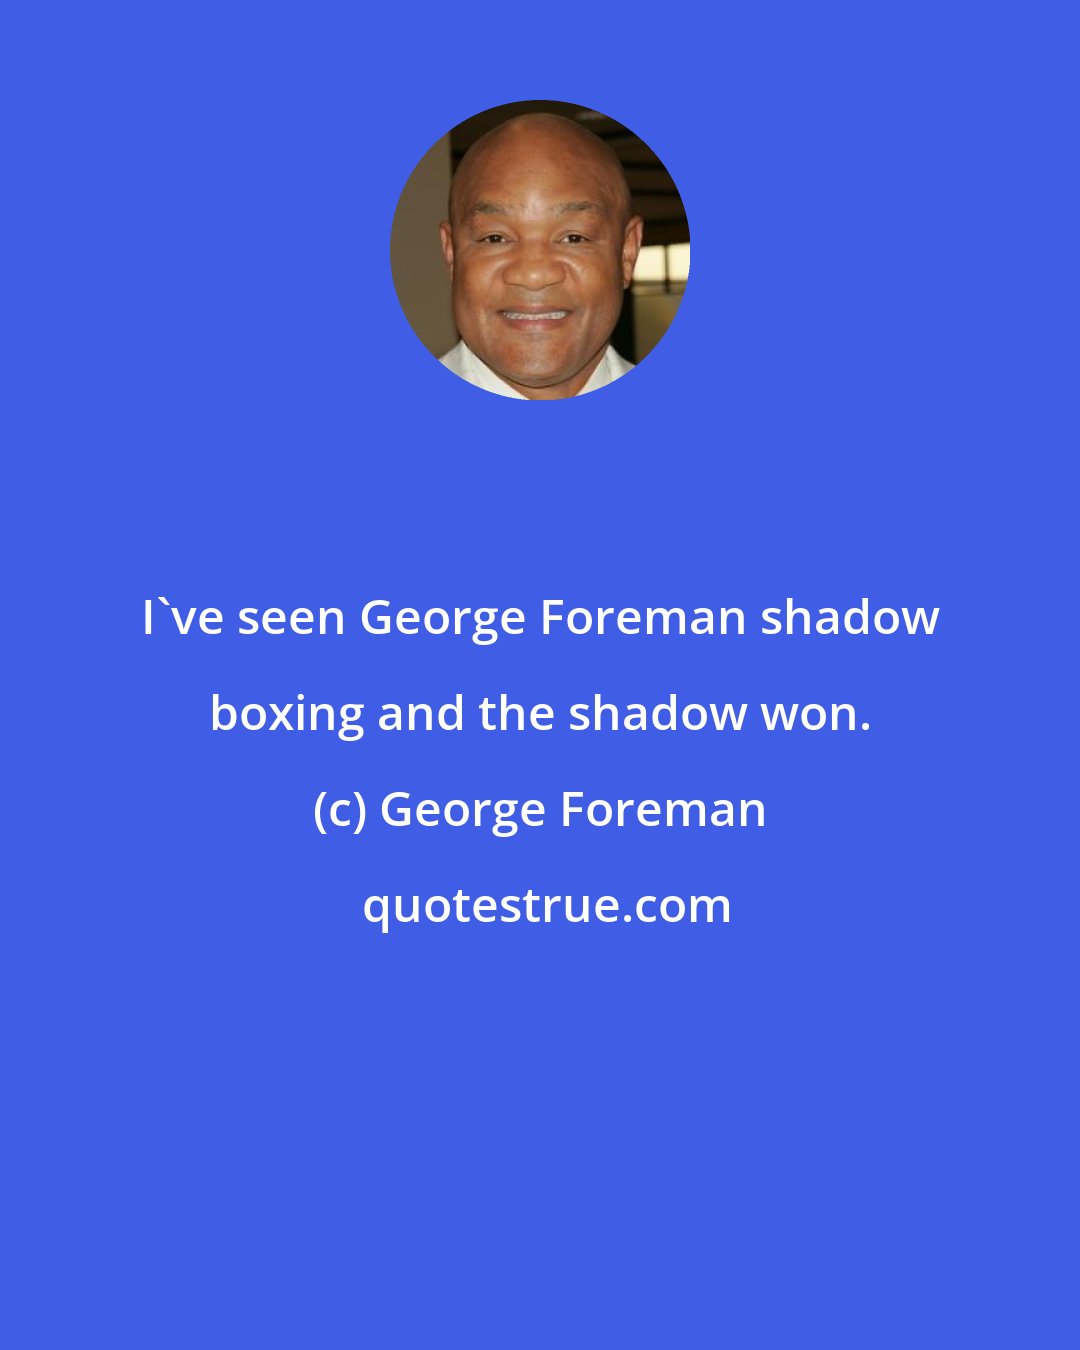 George Foreman: I've seen George Foreman shadow boxing and the shadow won.